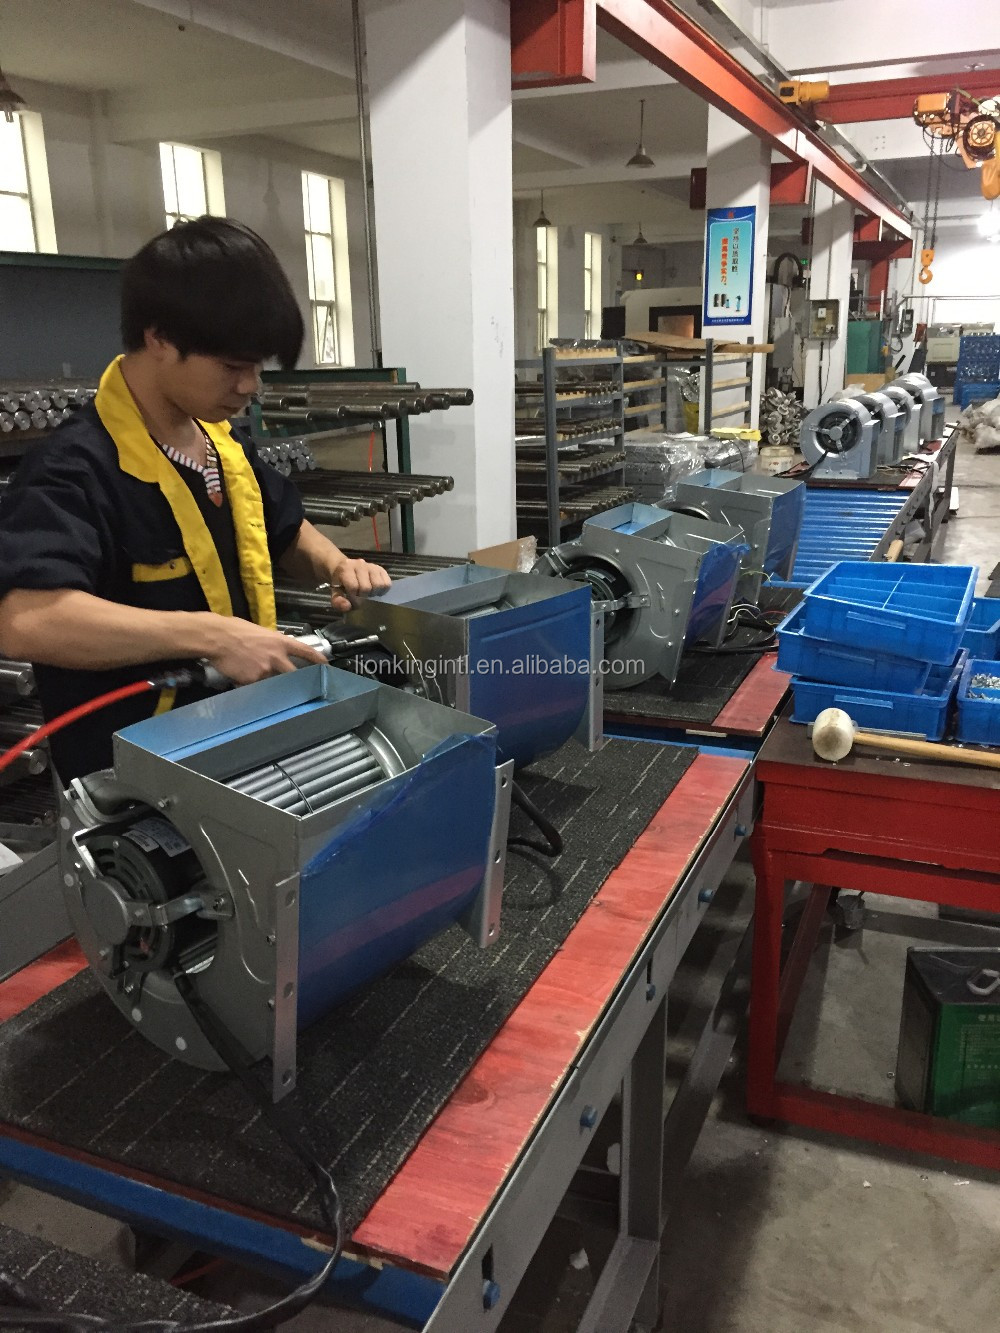 High quality galvanized steel centrifugal blower fan for air-conditioning system